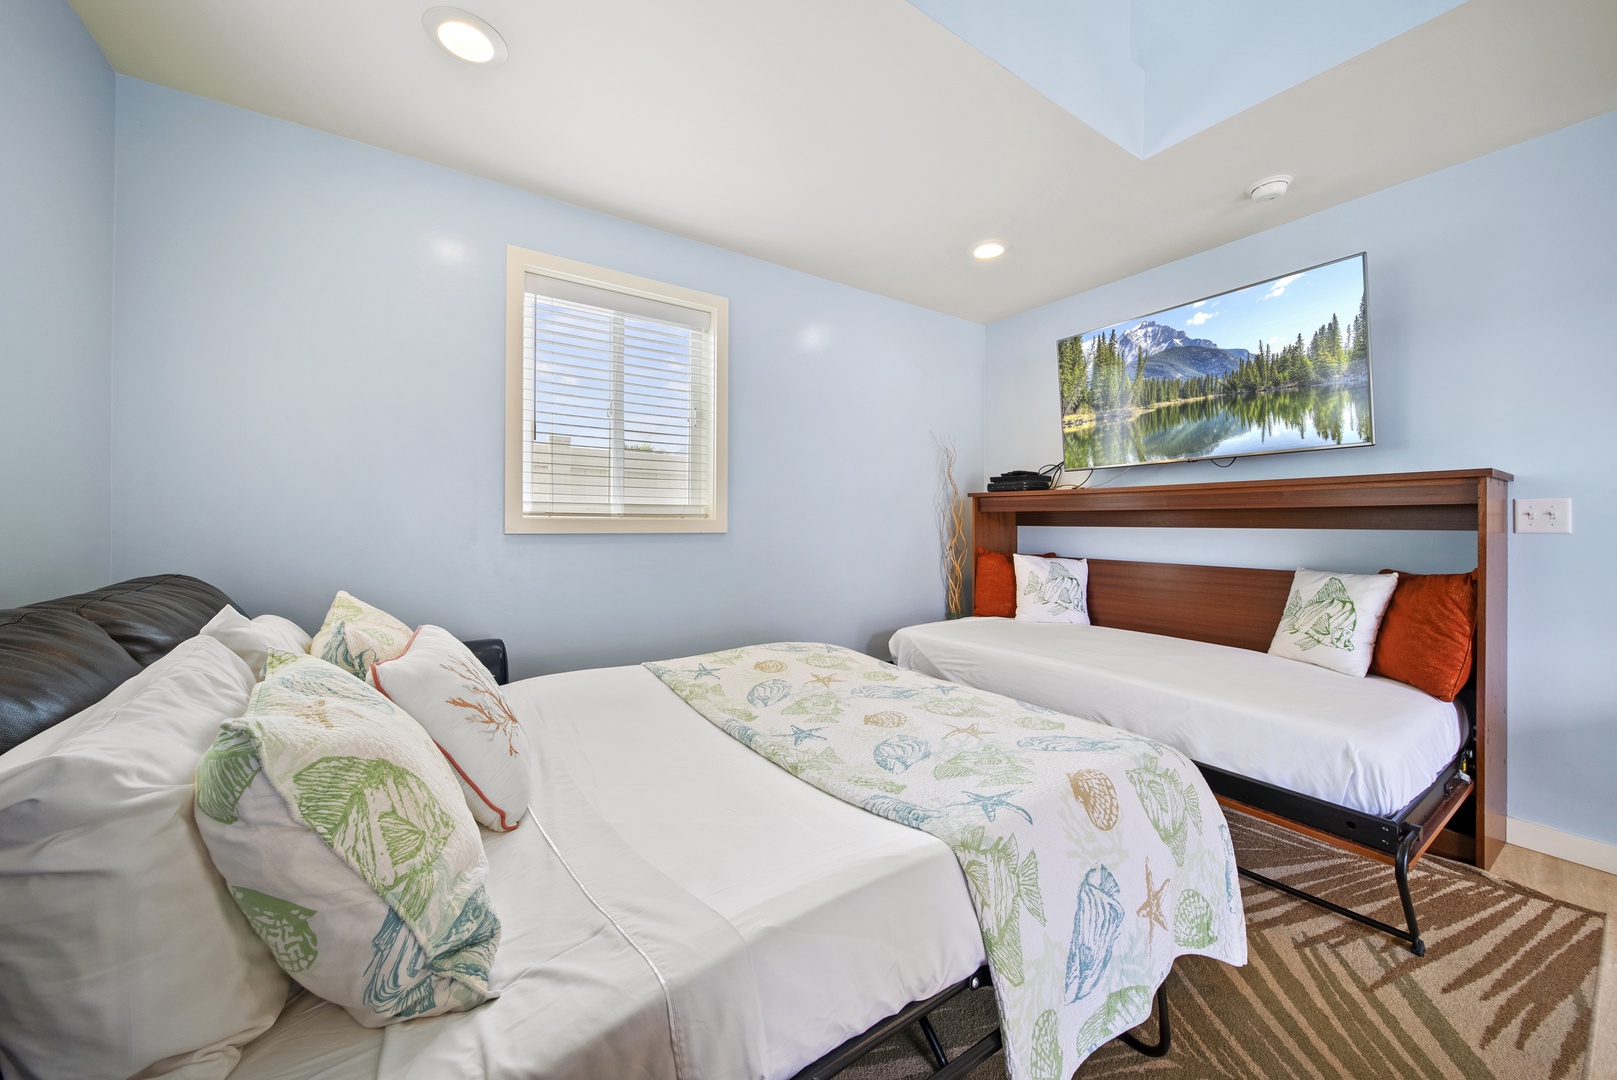 Waialua Vacation Rentals, Waialua Beachside Cottage - Pull out sofa bed sleeps 2 kids or one adult